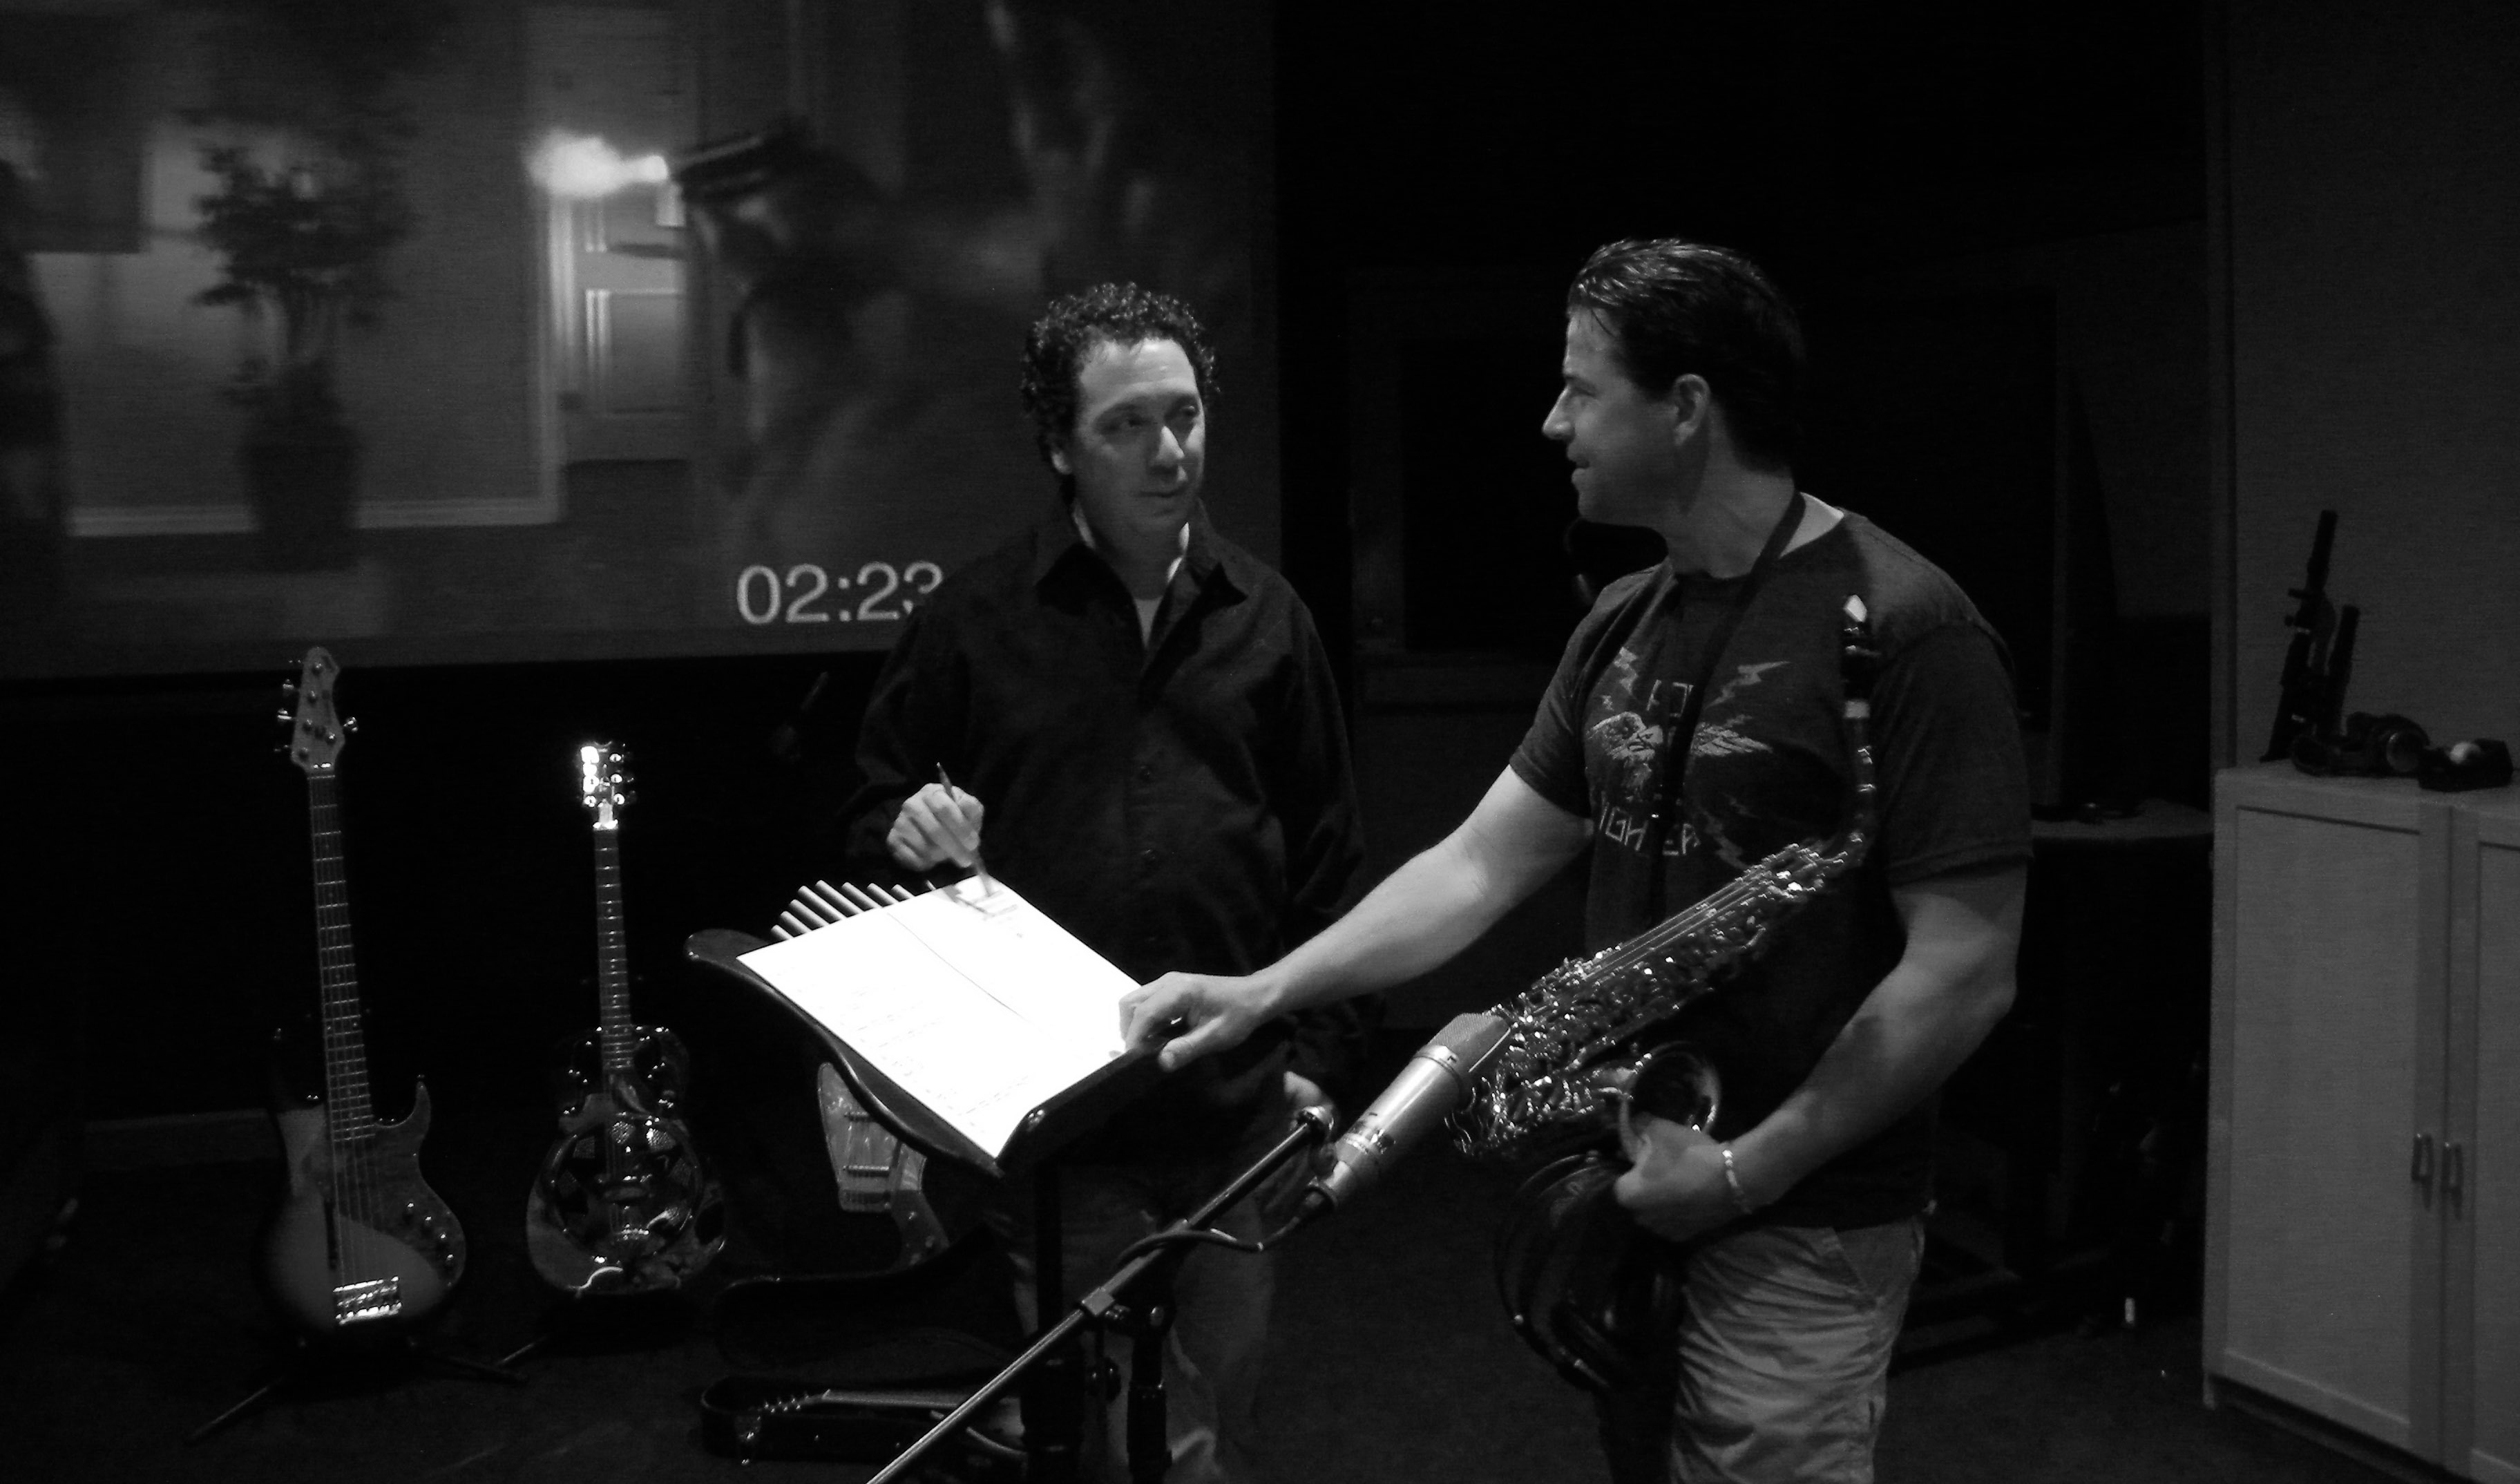 Composer Ben Zarai discussing musical performance with sax player David Barber